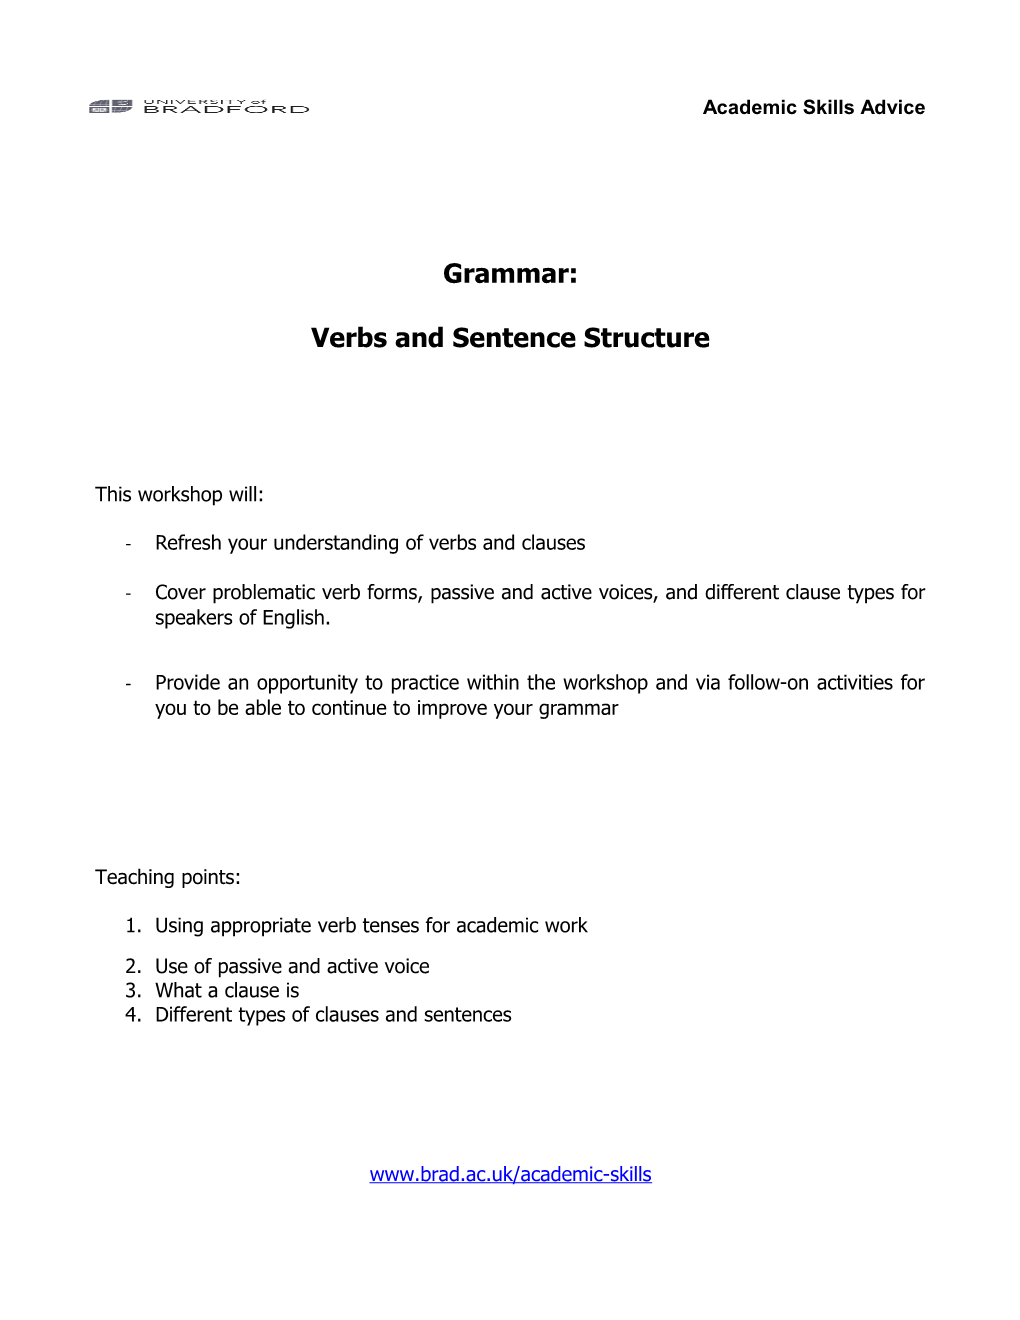 Verbs and Sentence Structure